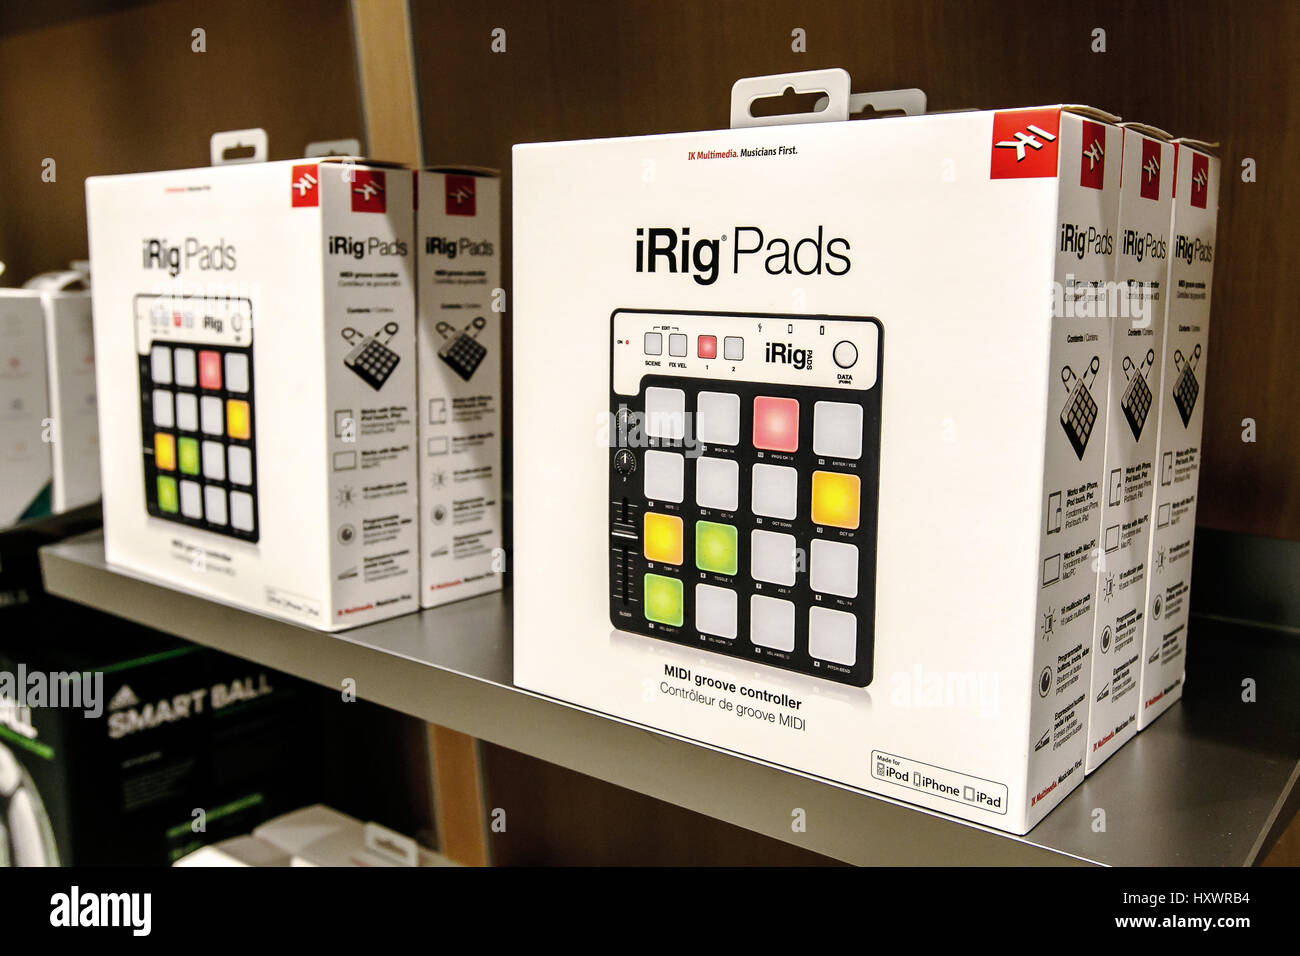 iRig Pads, an MIDI groove controller, is offered for sale in an Apple store. Stock Photo